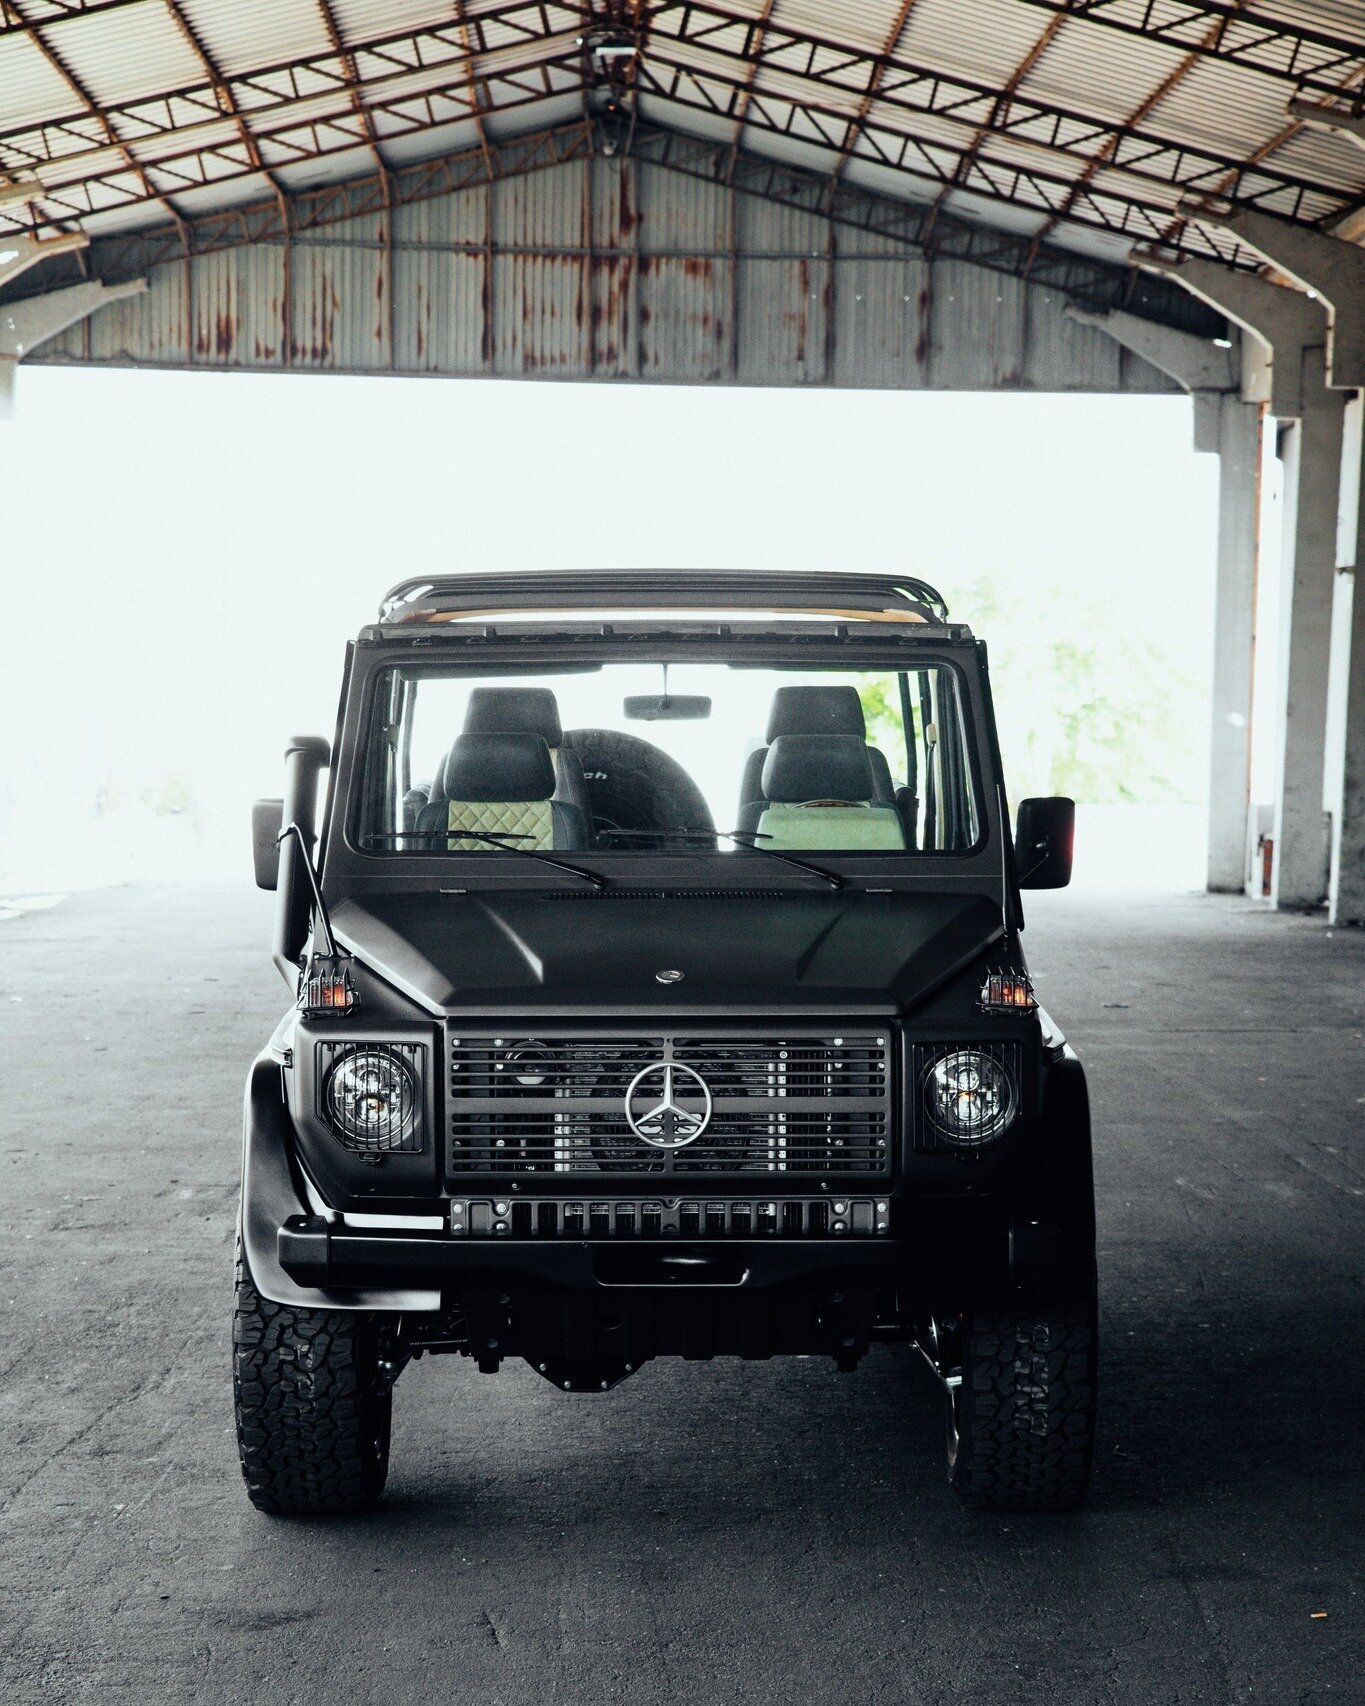 Our restored 1993 Mercedes-Benz GE230 is your ticket to a life of luxury. Get ready to elevate your lifestyle.

#mercedes #gwagon #ge230 #mercedesbenz #truck #bespoke  #matte #custom #restoration #handcrafted #classiccar #luxurylifestyle #urban #vint